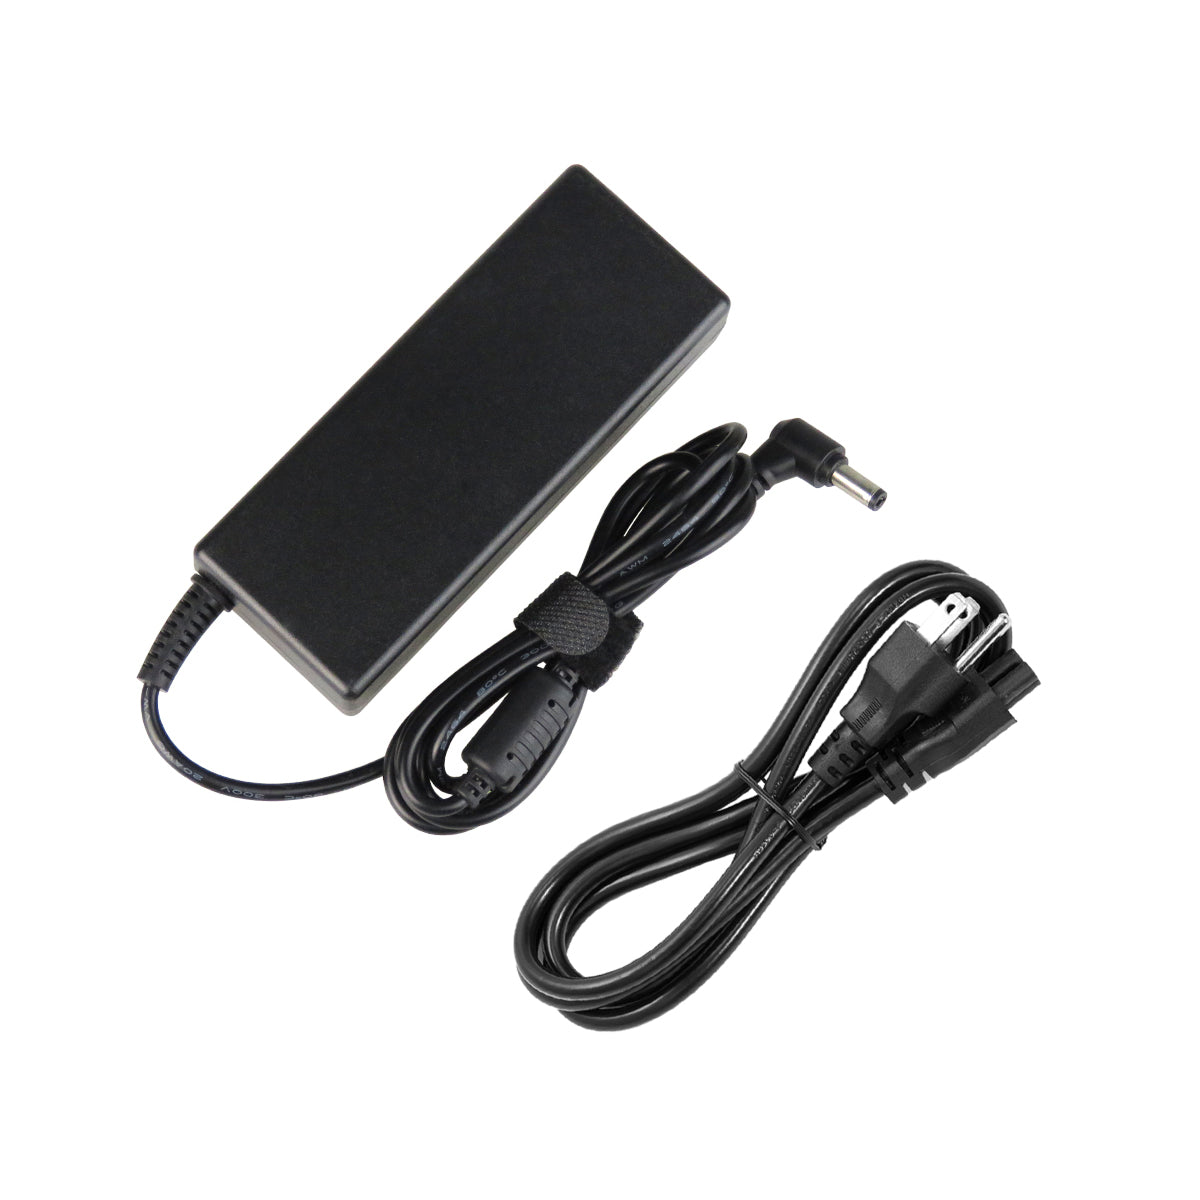 AC Adapter Charger for ASUS N82JQ Notebook.